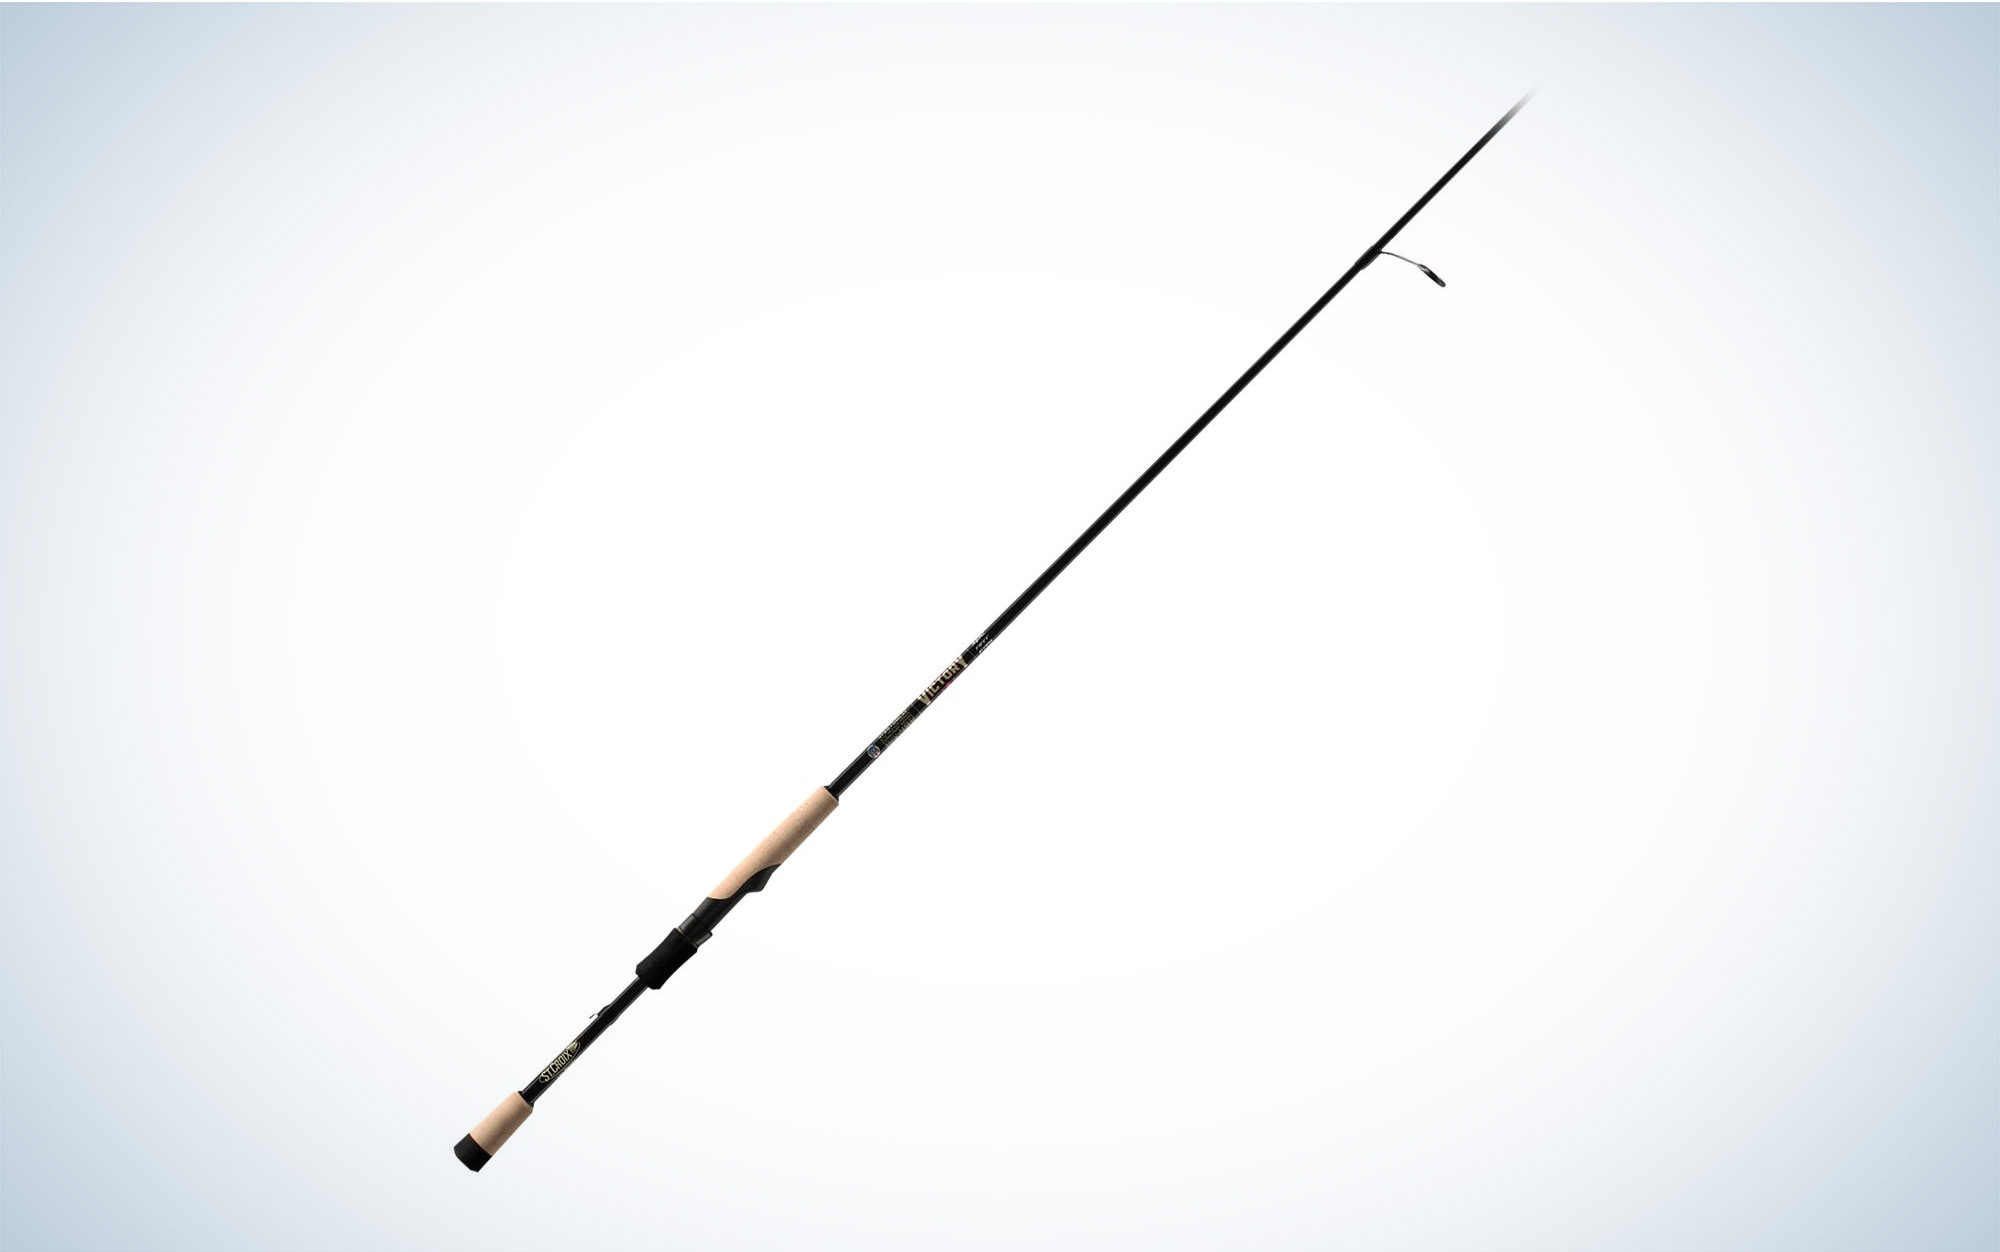 The St. Croix Victory spinning rod is the best overall for bass.